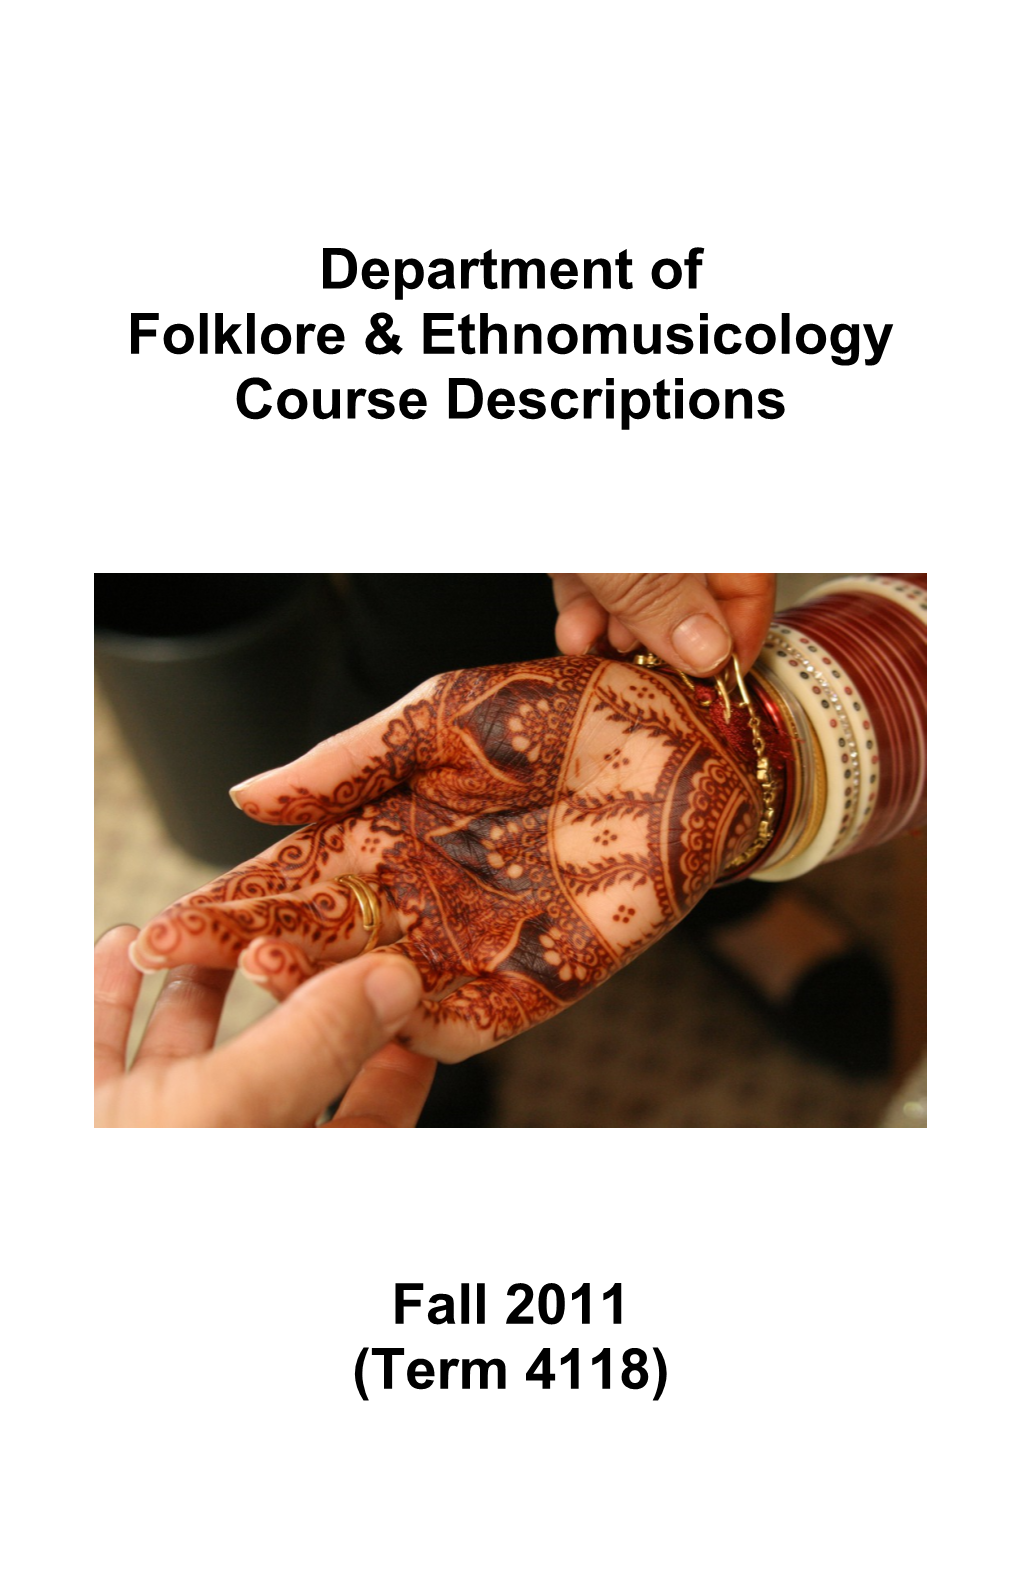 The Department of Folklore and Ethnomusicology Courses Range from Introductory Courses